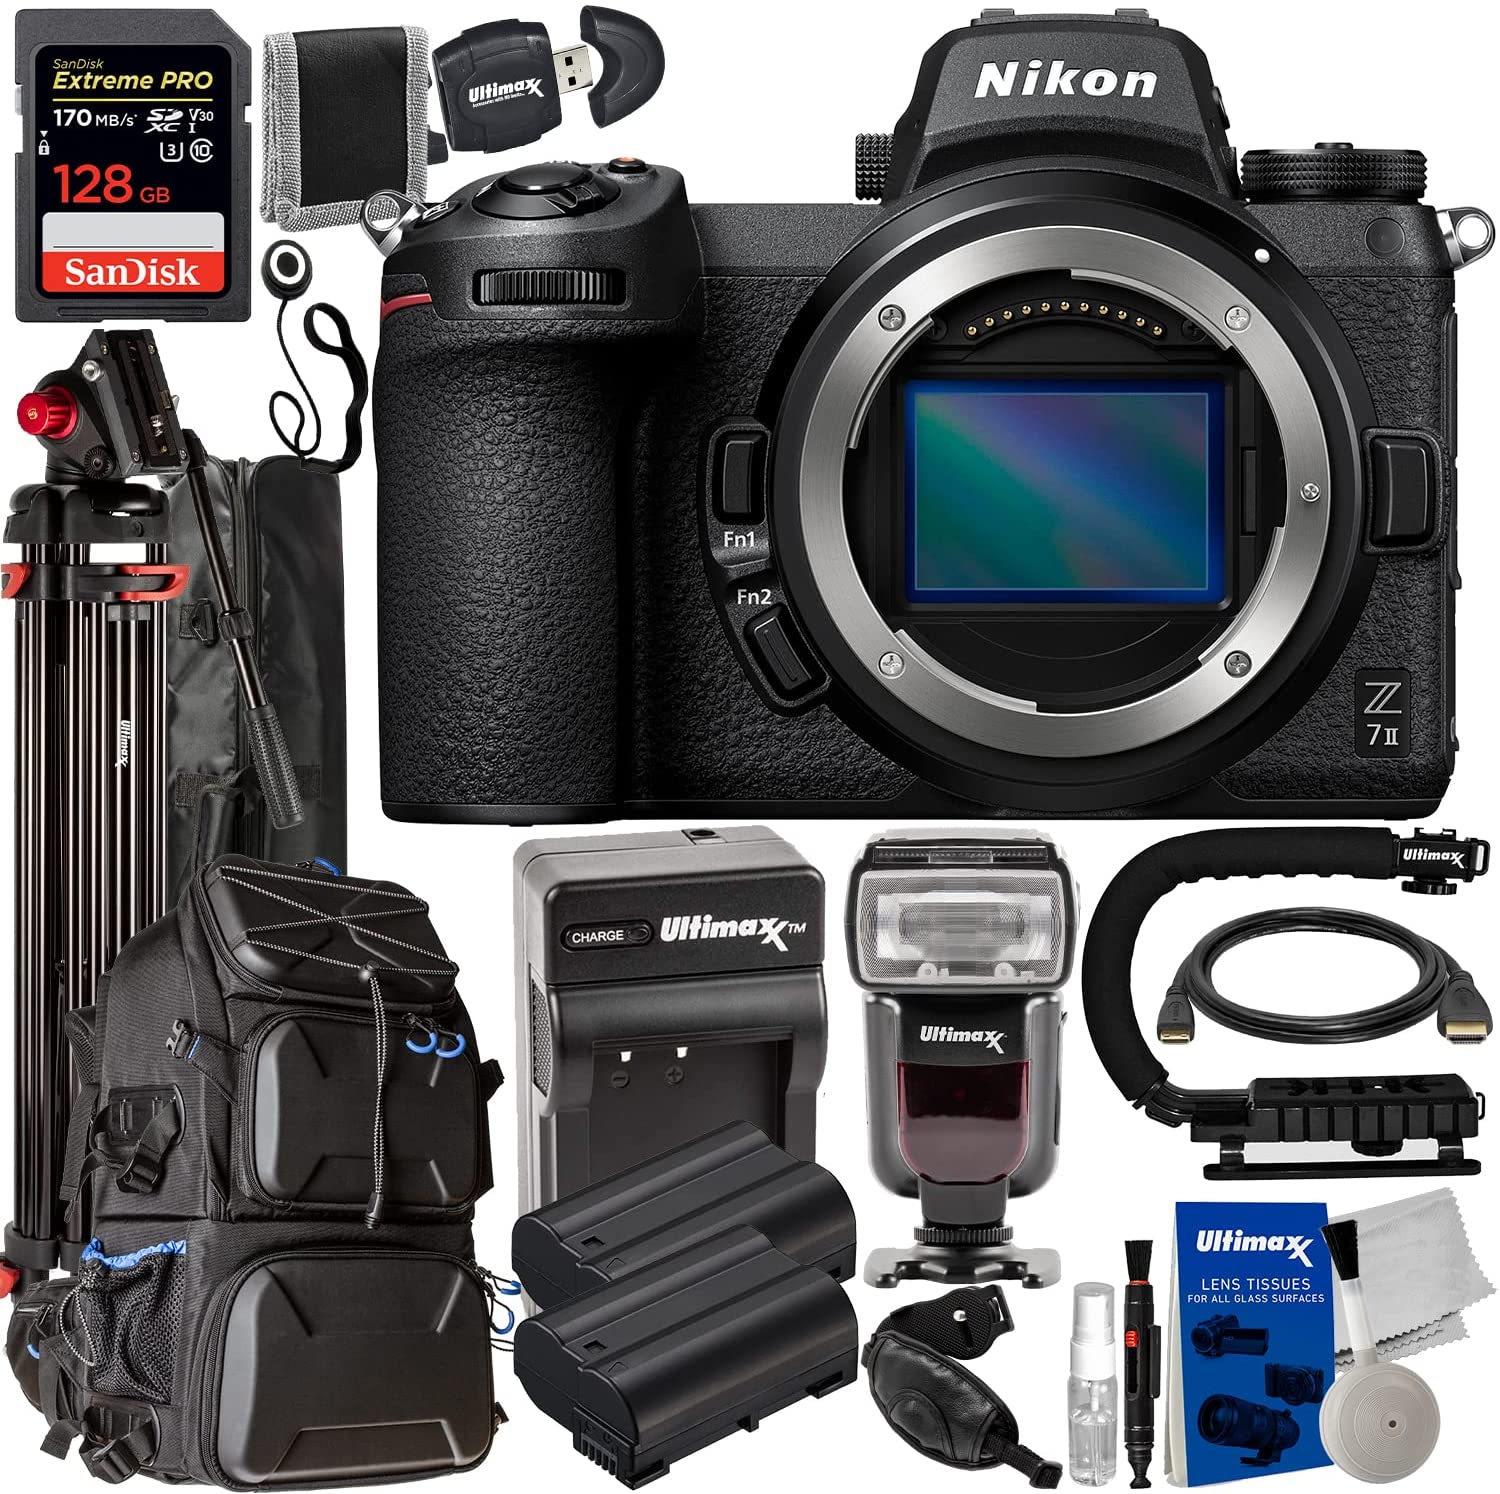 Nikon Z7 II Mirrorless Camera (Body Only) + SanDisk 128GB Extreme Pro SDXC, Hard Shell Deluxe Camera Backpack, 2X Extended Life Batteries, TTL Dedicated Flash for Nikon & Much More (27pc Bundle)